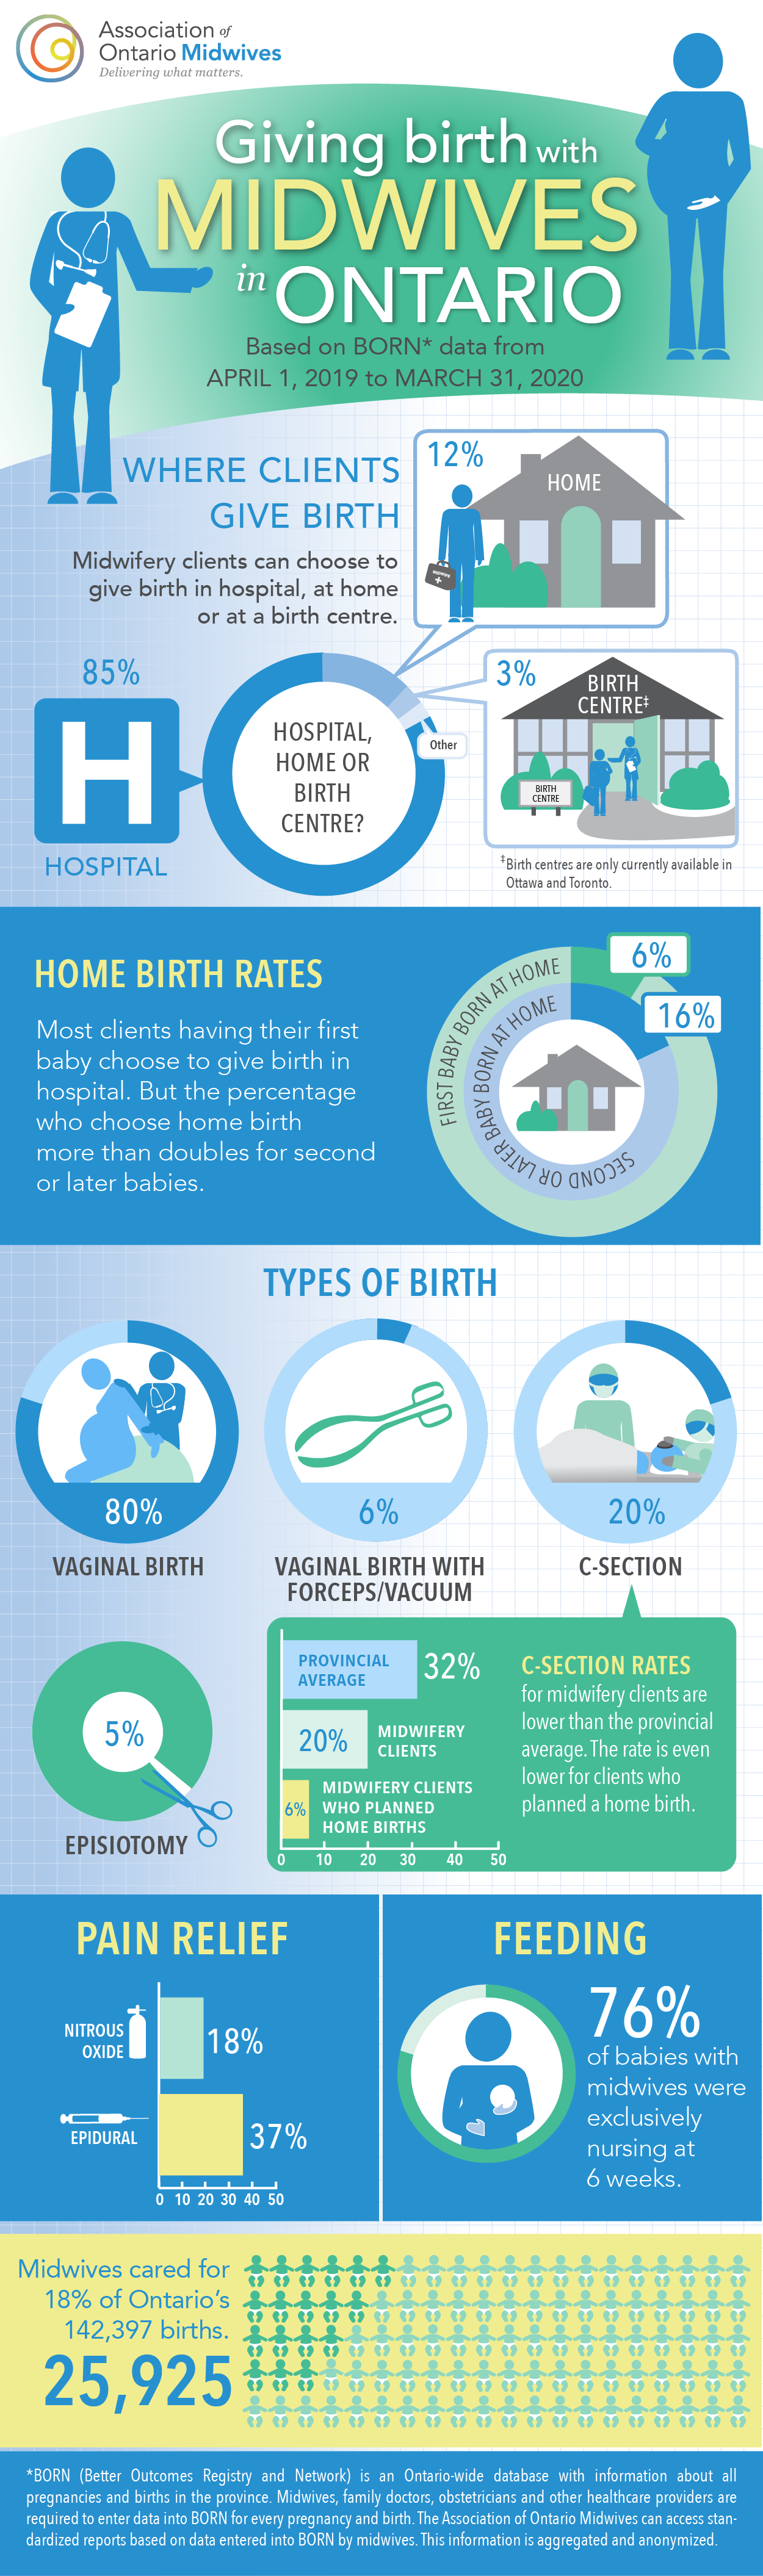 Infographic depicting midwifery statistics from April 2019 to March 2020